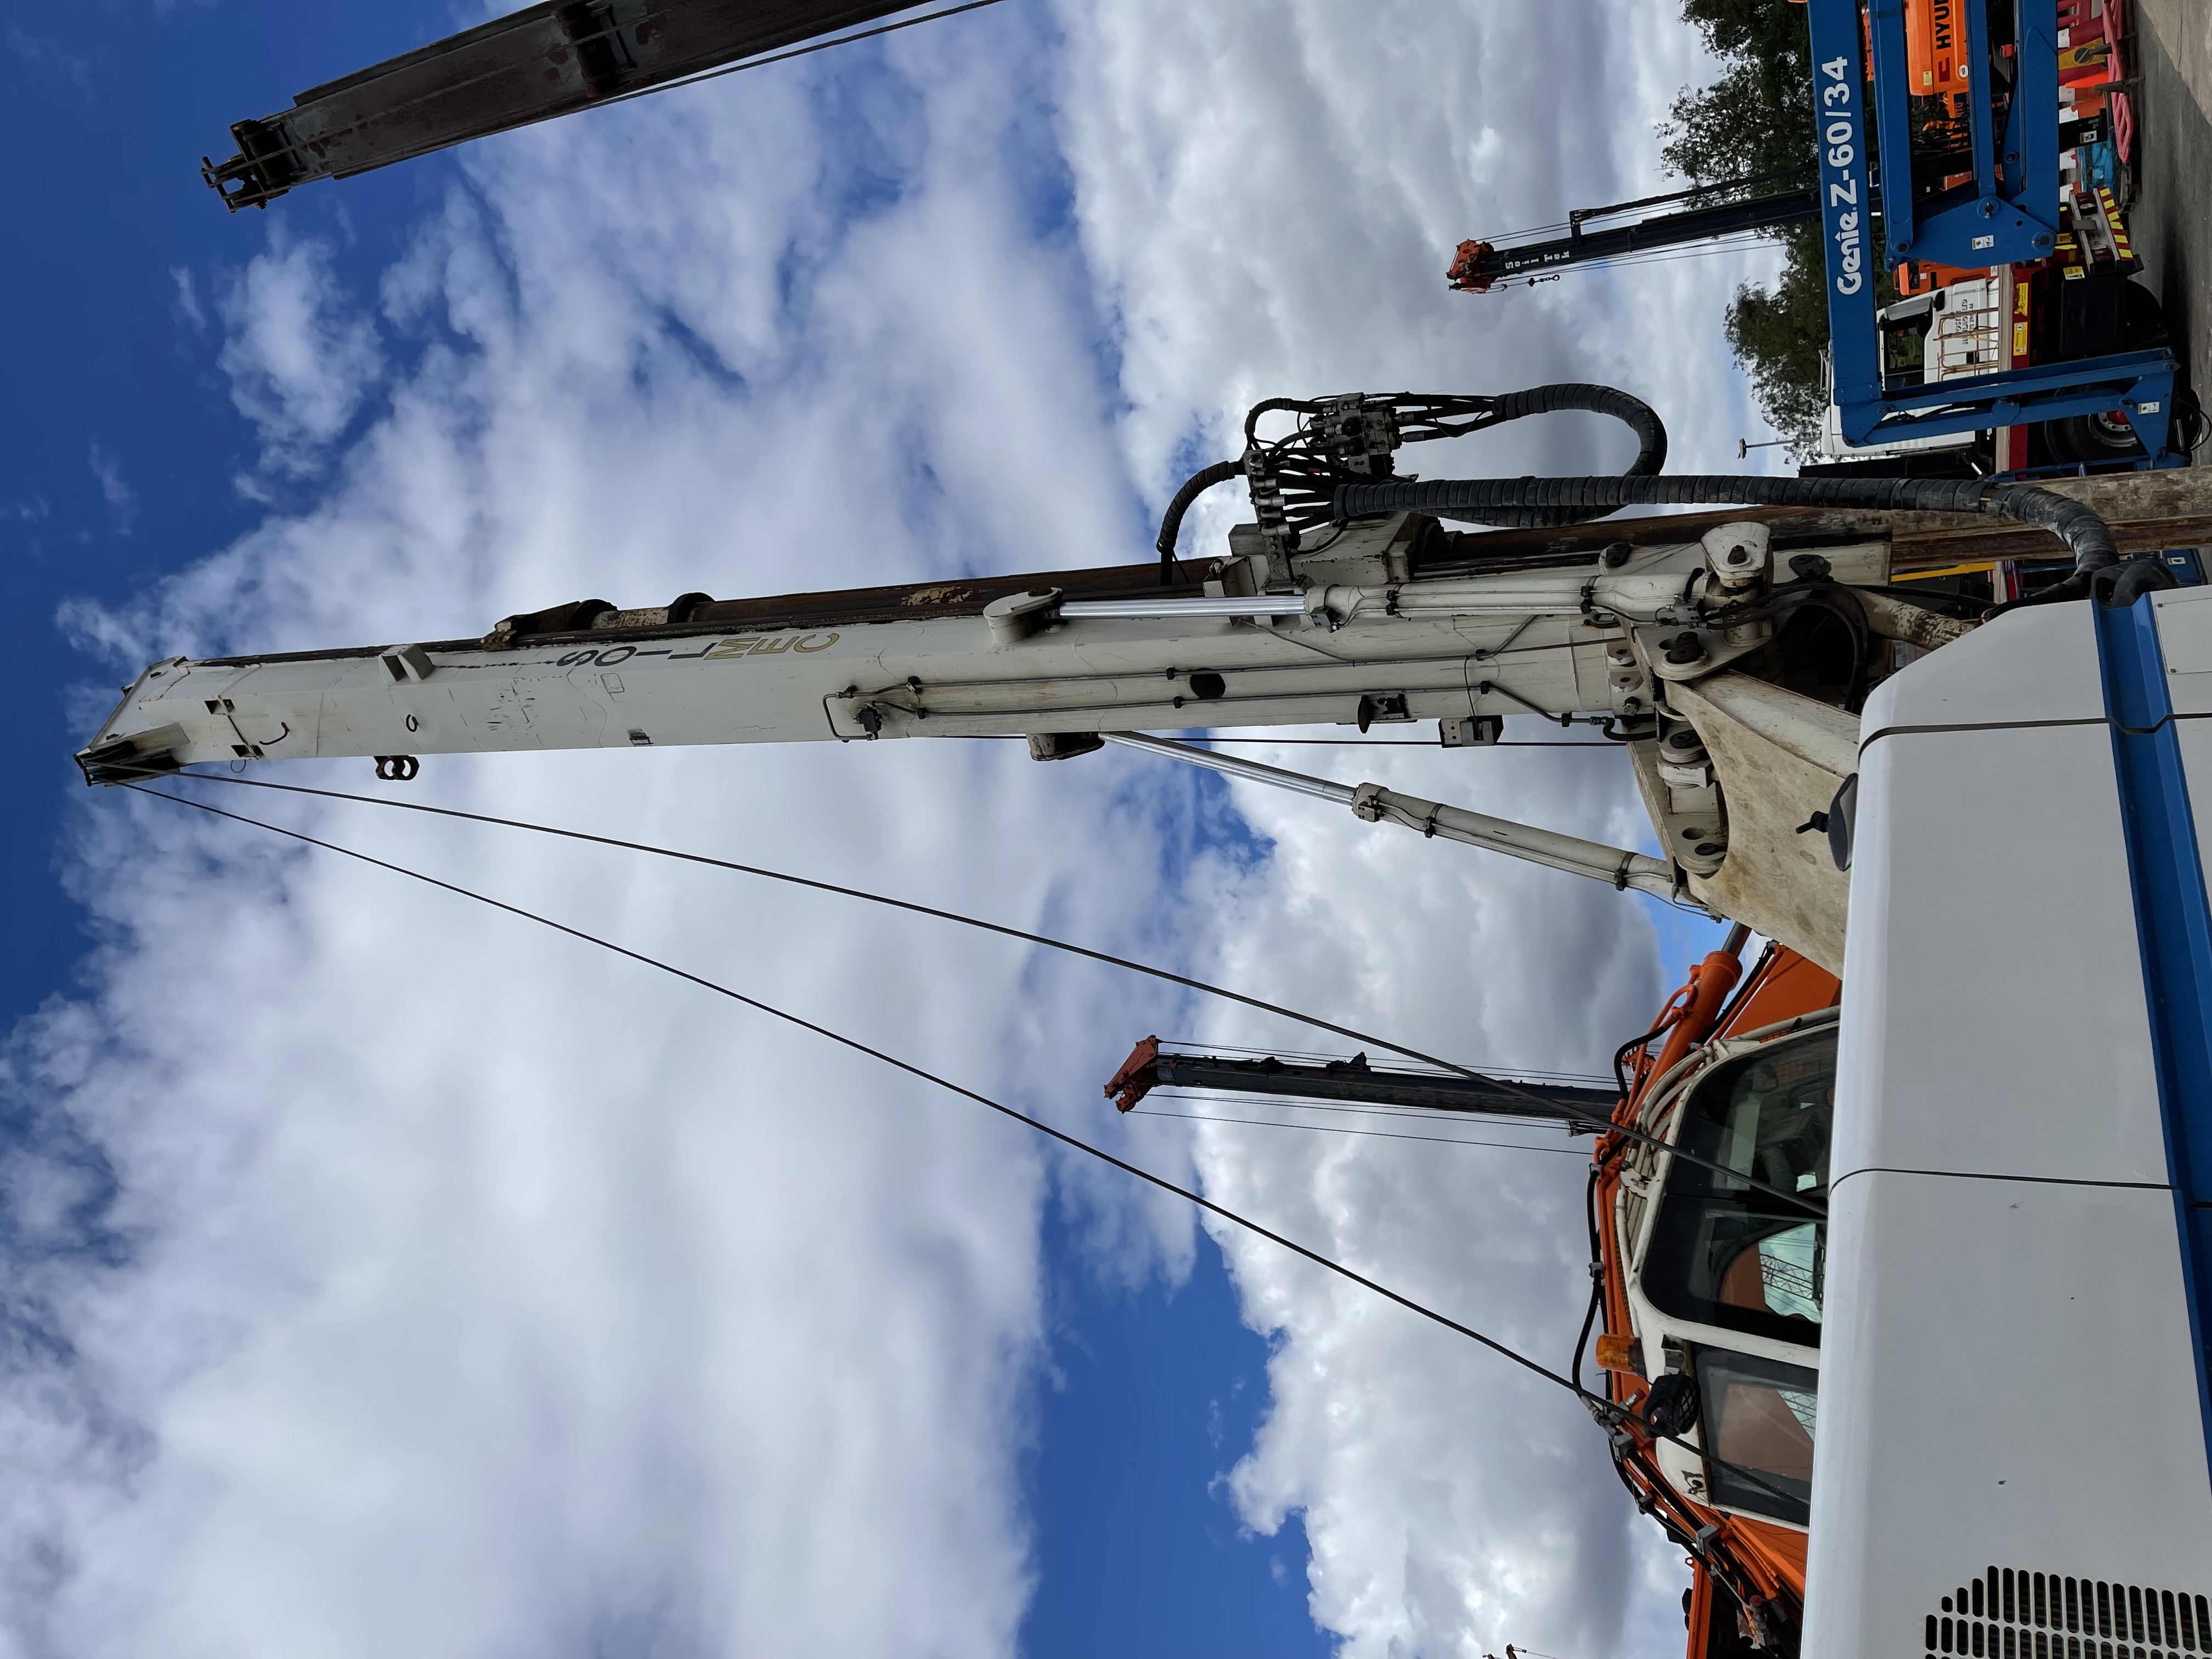 Used Soilmec R210 bored piling rig for sale with CFA kit